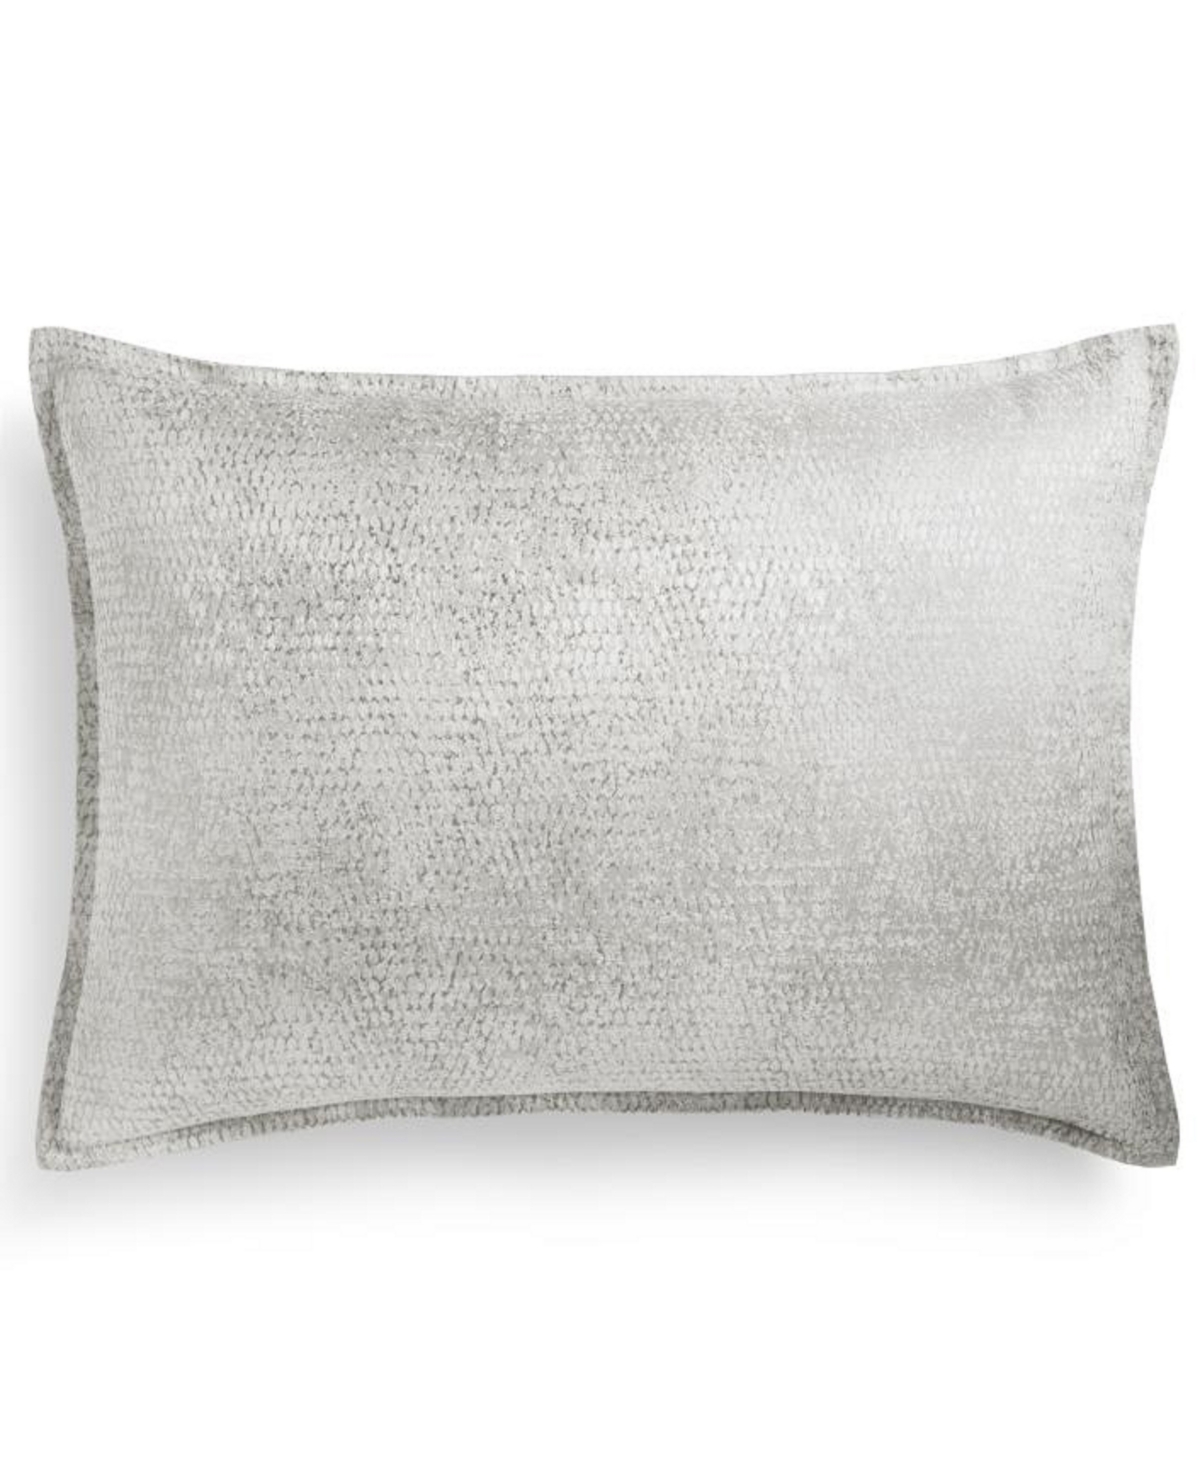 Closeout! Hotel Collection Tessellate Sham, King, Created for Macy's - Light Gray